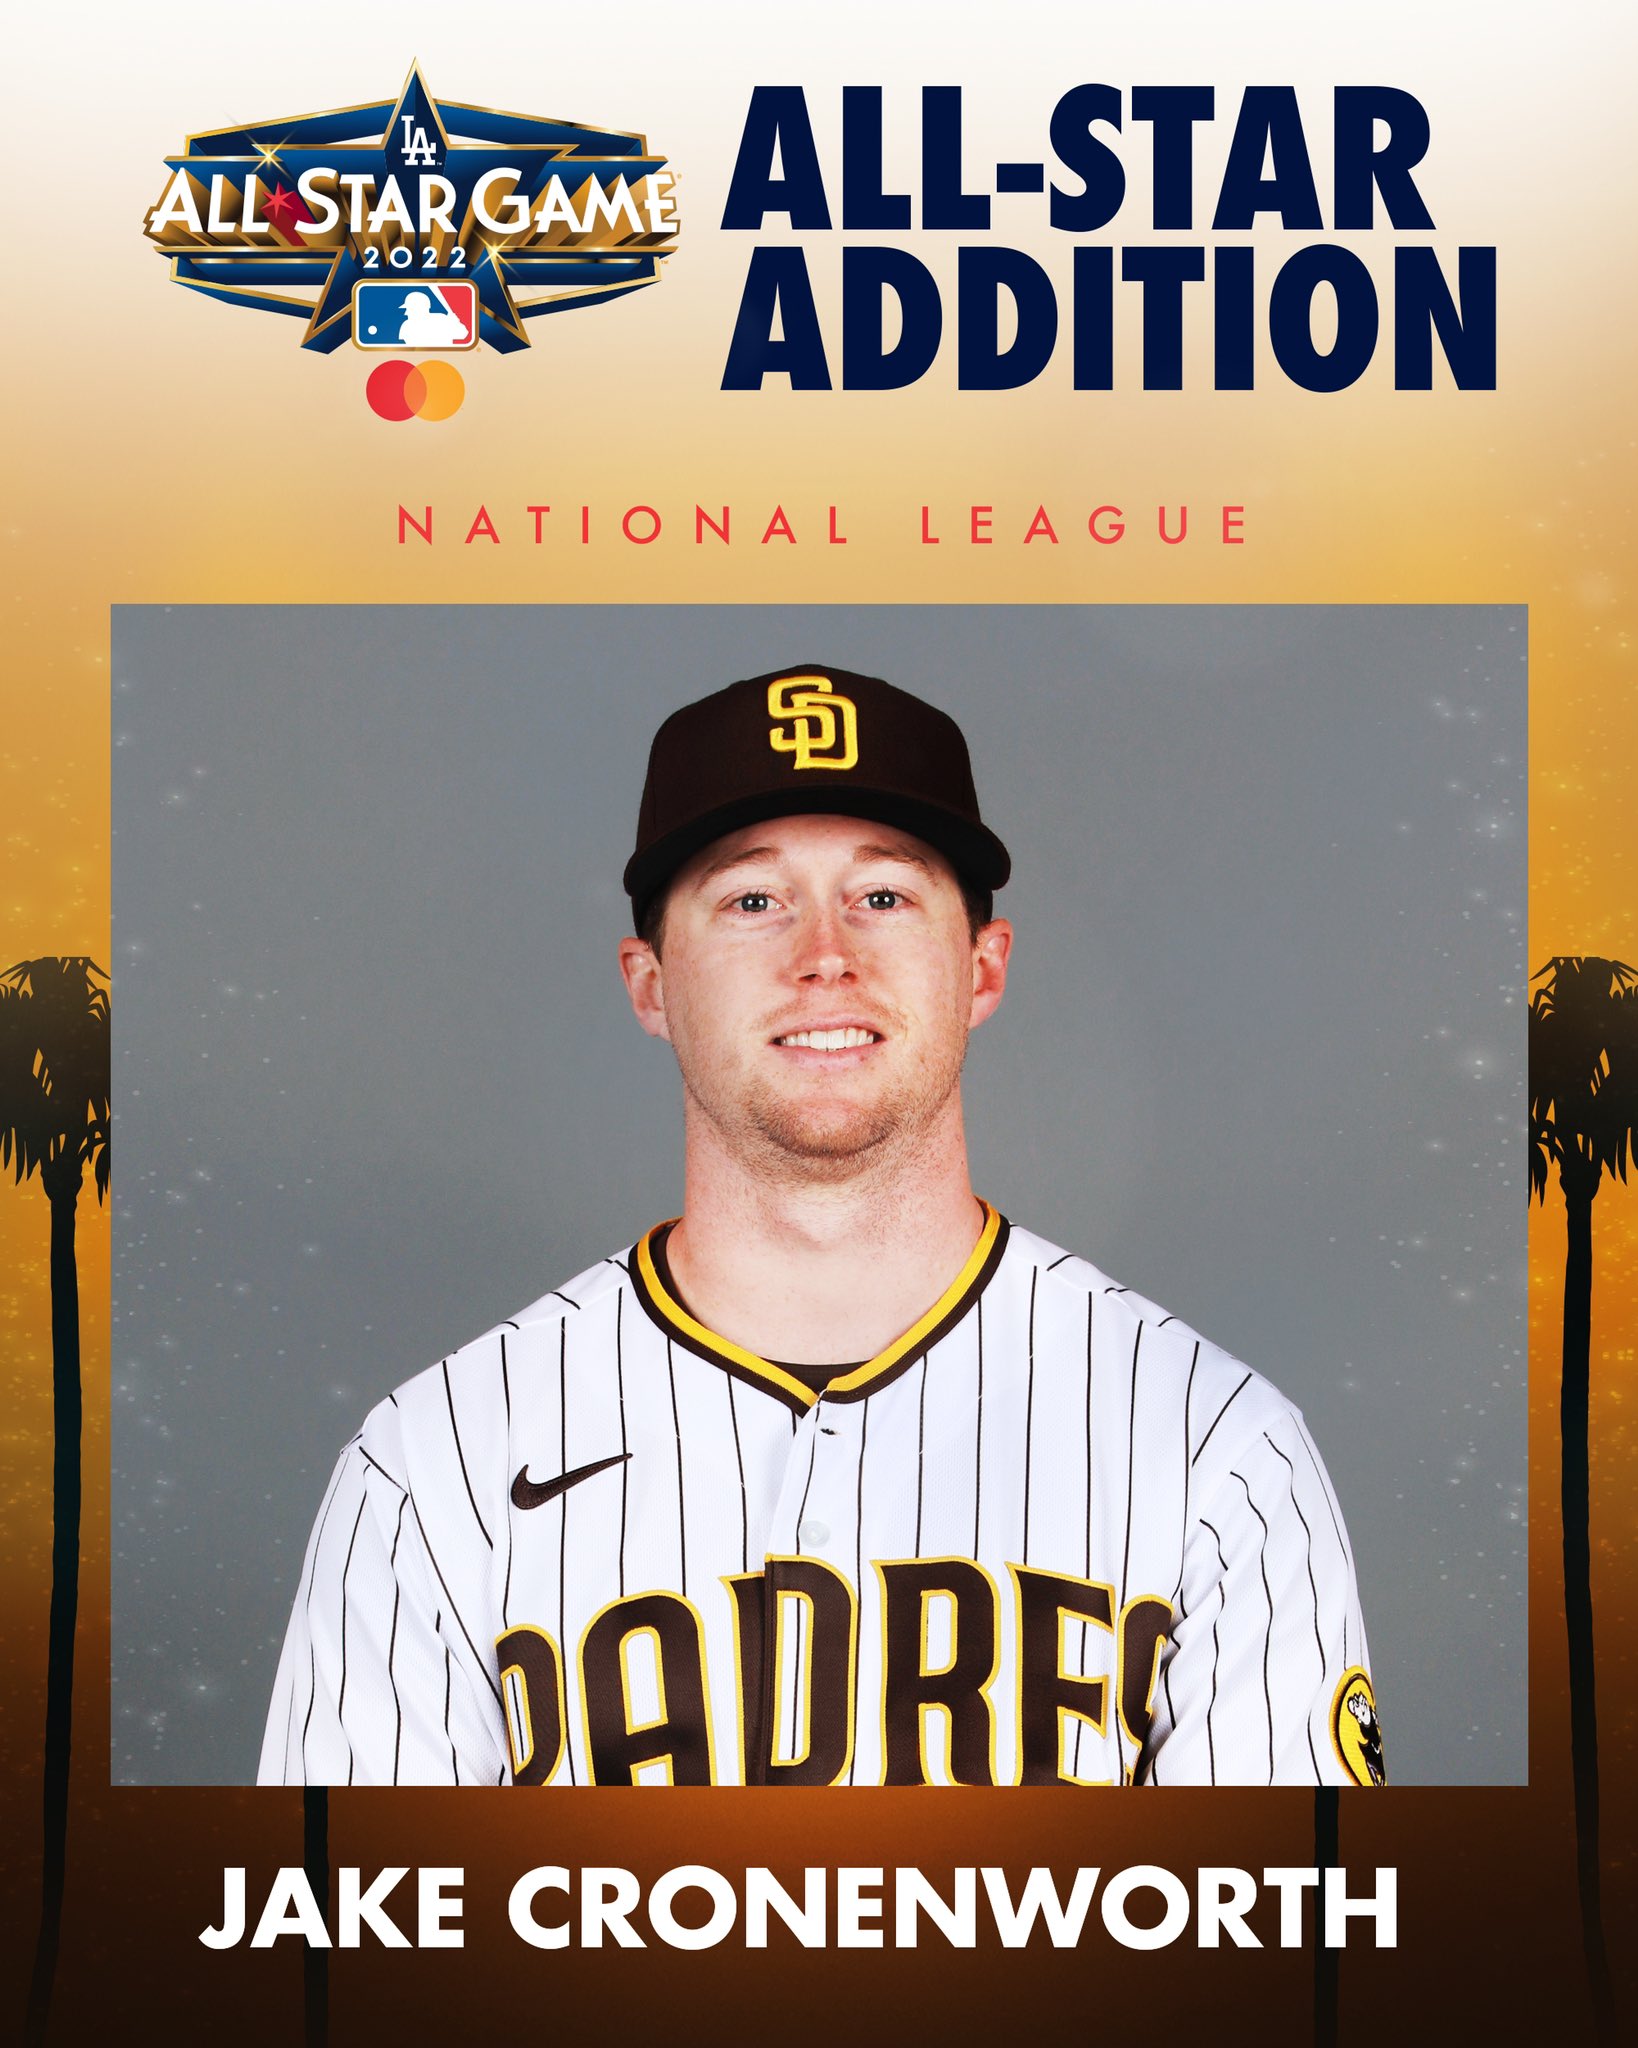 MLB on X: The CroneZone is heading to the All-Star Game! Jake Cronenworth  replaces Jazz Chisholm Jr. on the National League roster. 2B Jeff McNeil  has been moved to the starting lineup.